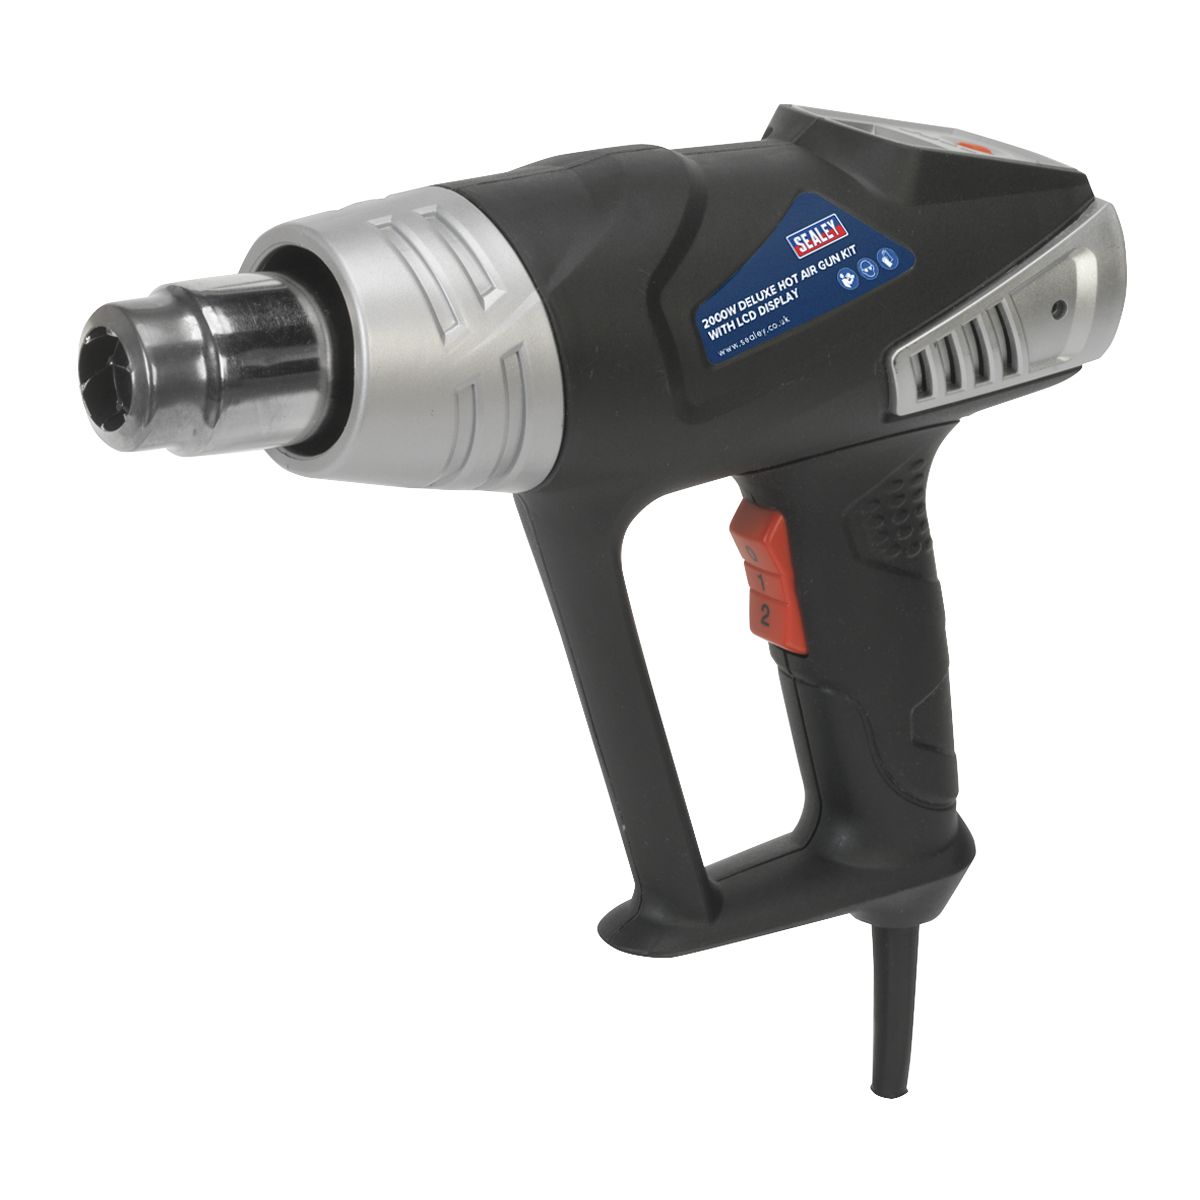 Sealey Deluxe Hot Air Gun Kit with LED Display 2000W 80-600°C